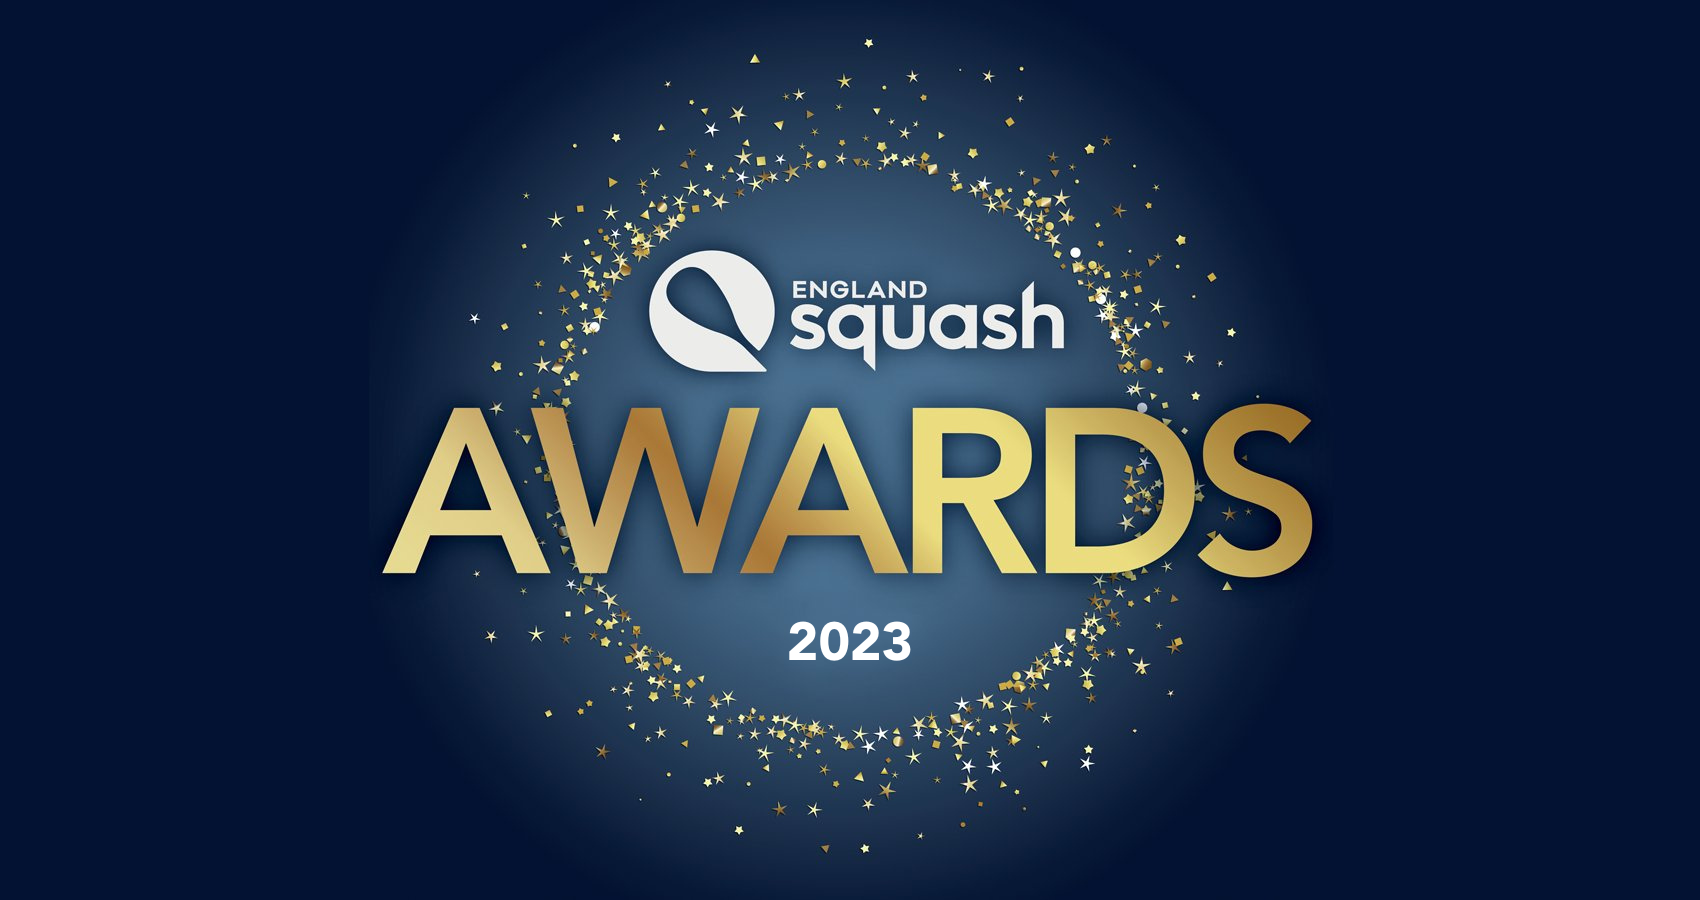 The winners of the 2023 England Squash Awards have been confirmed.